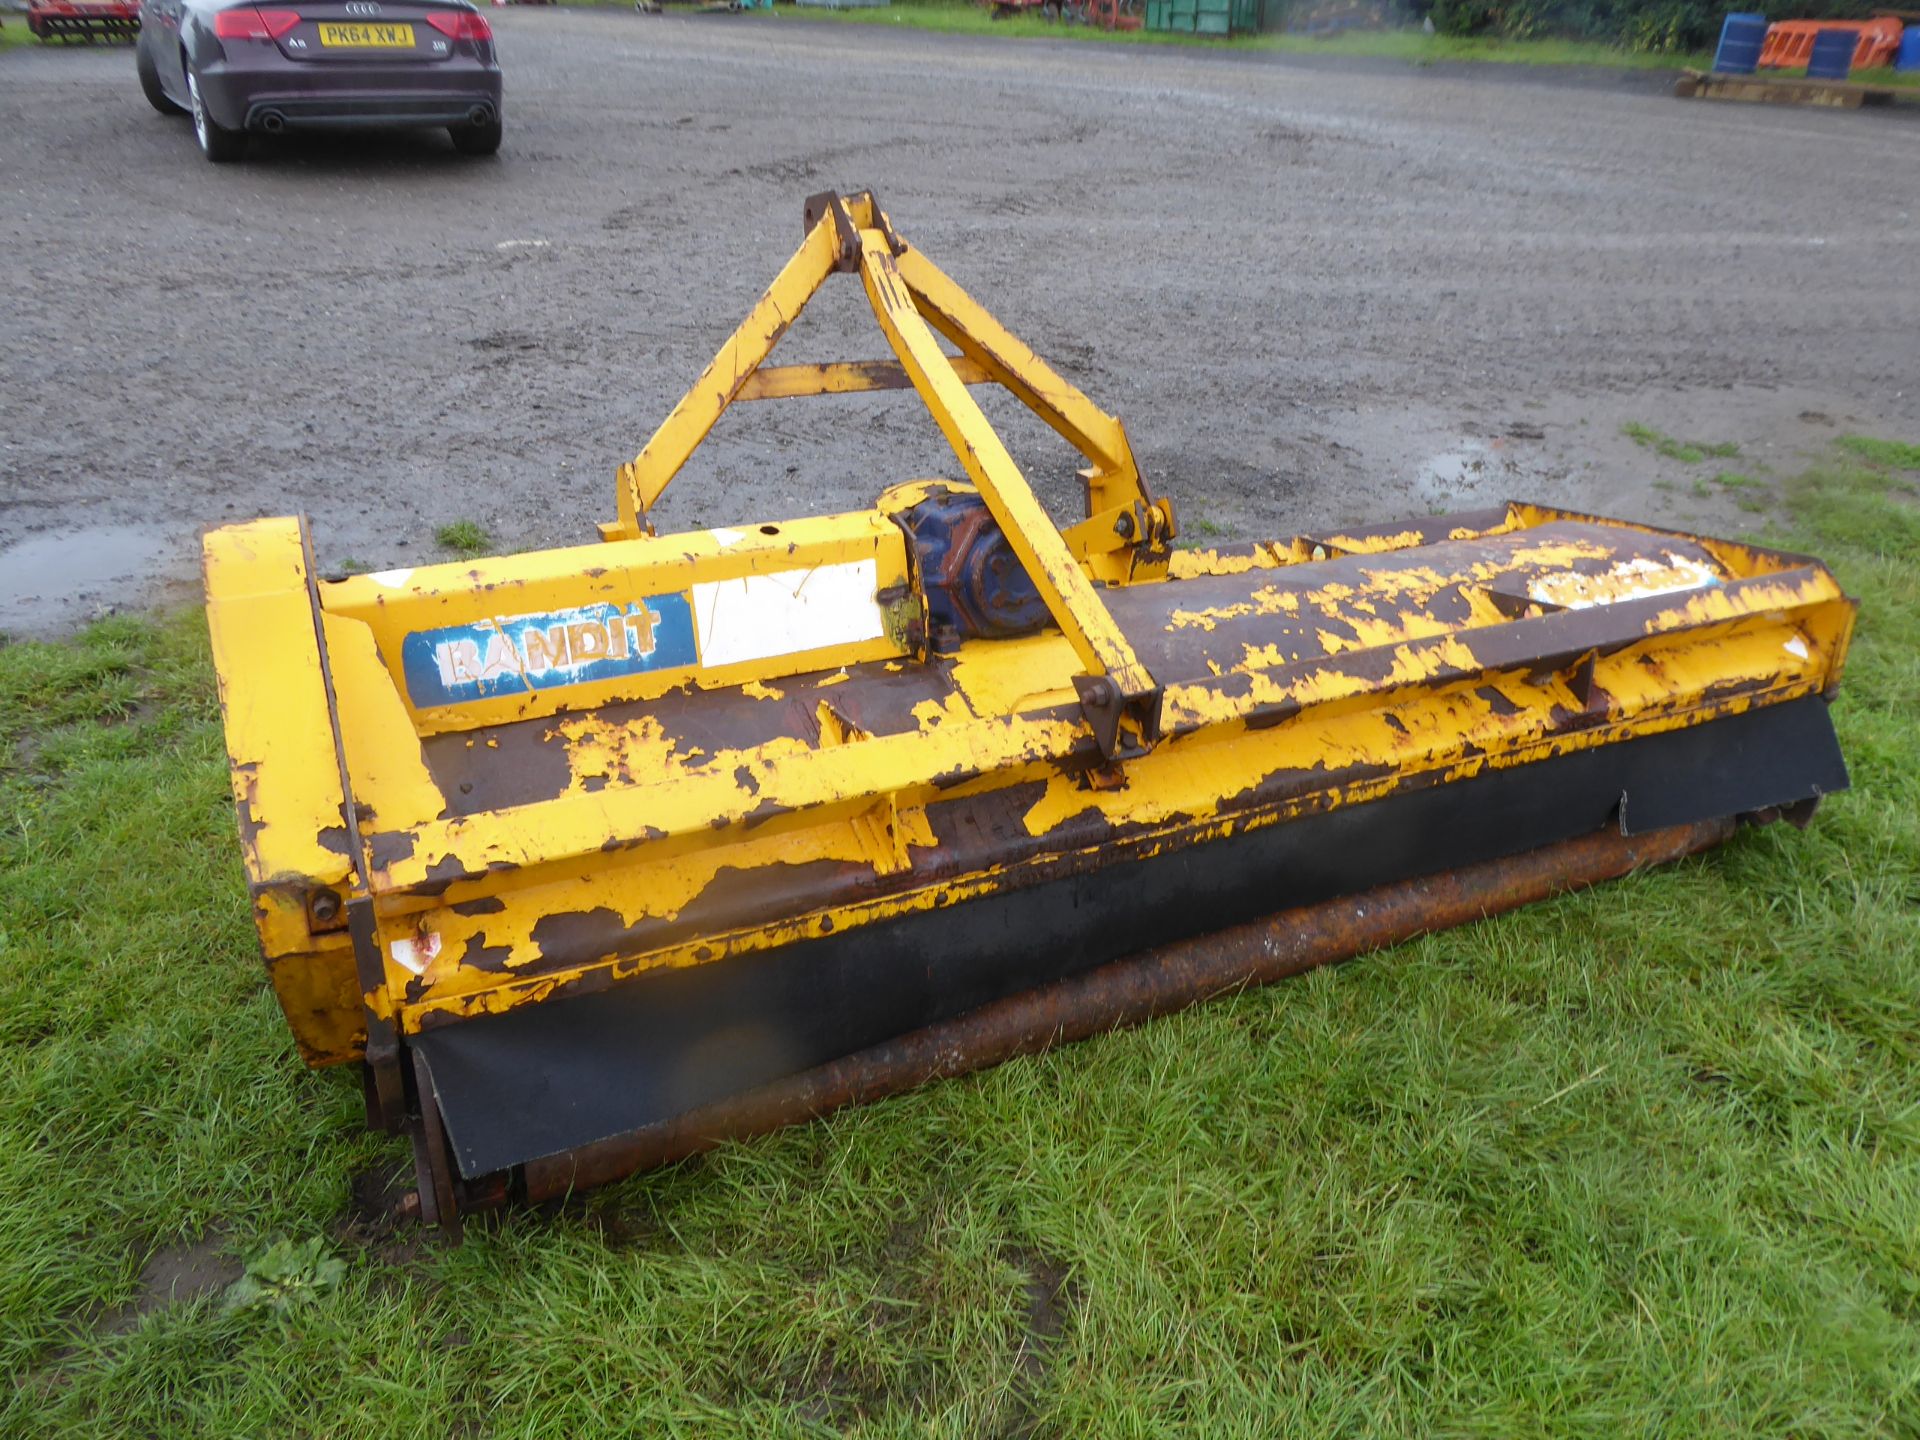 Bomford Bandit 2.3 mtr flail mower c/w rear roller - Image 2 of 2